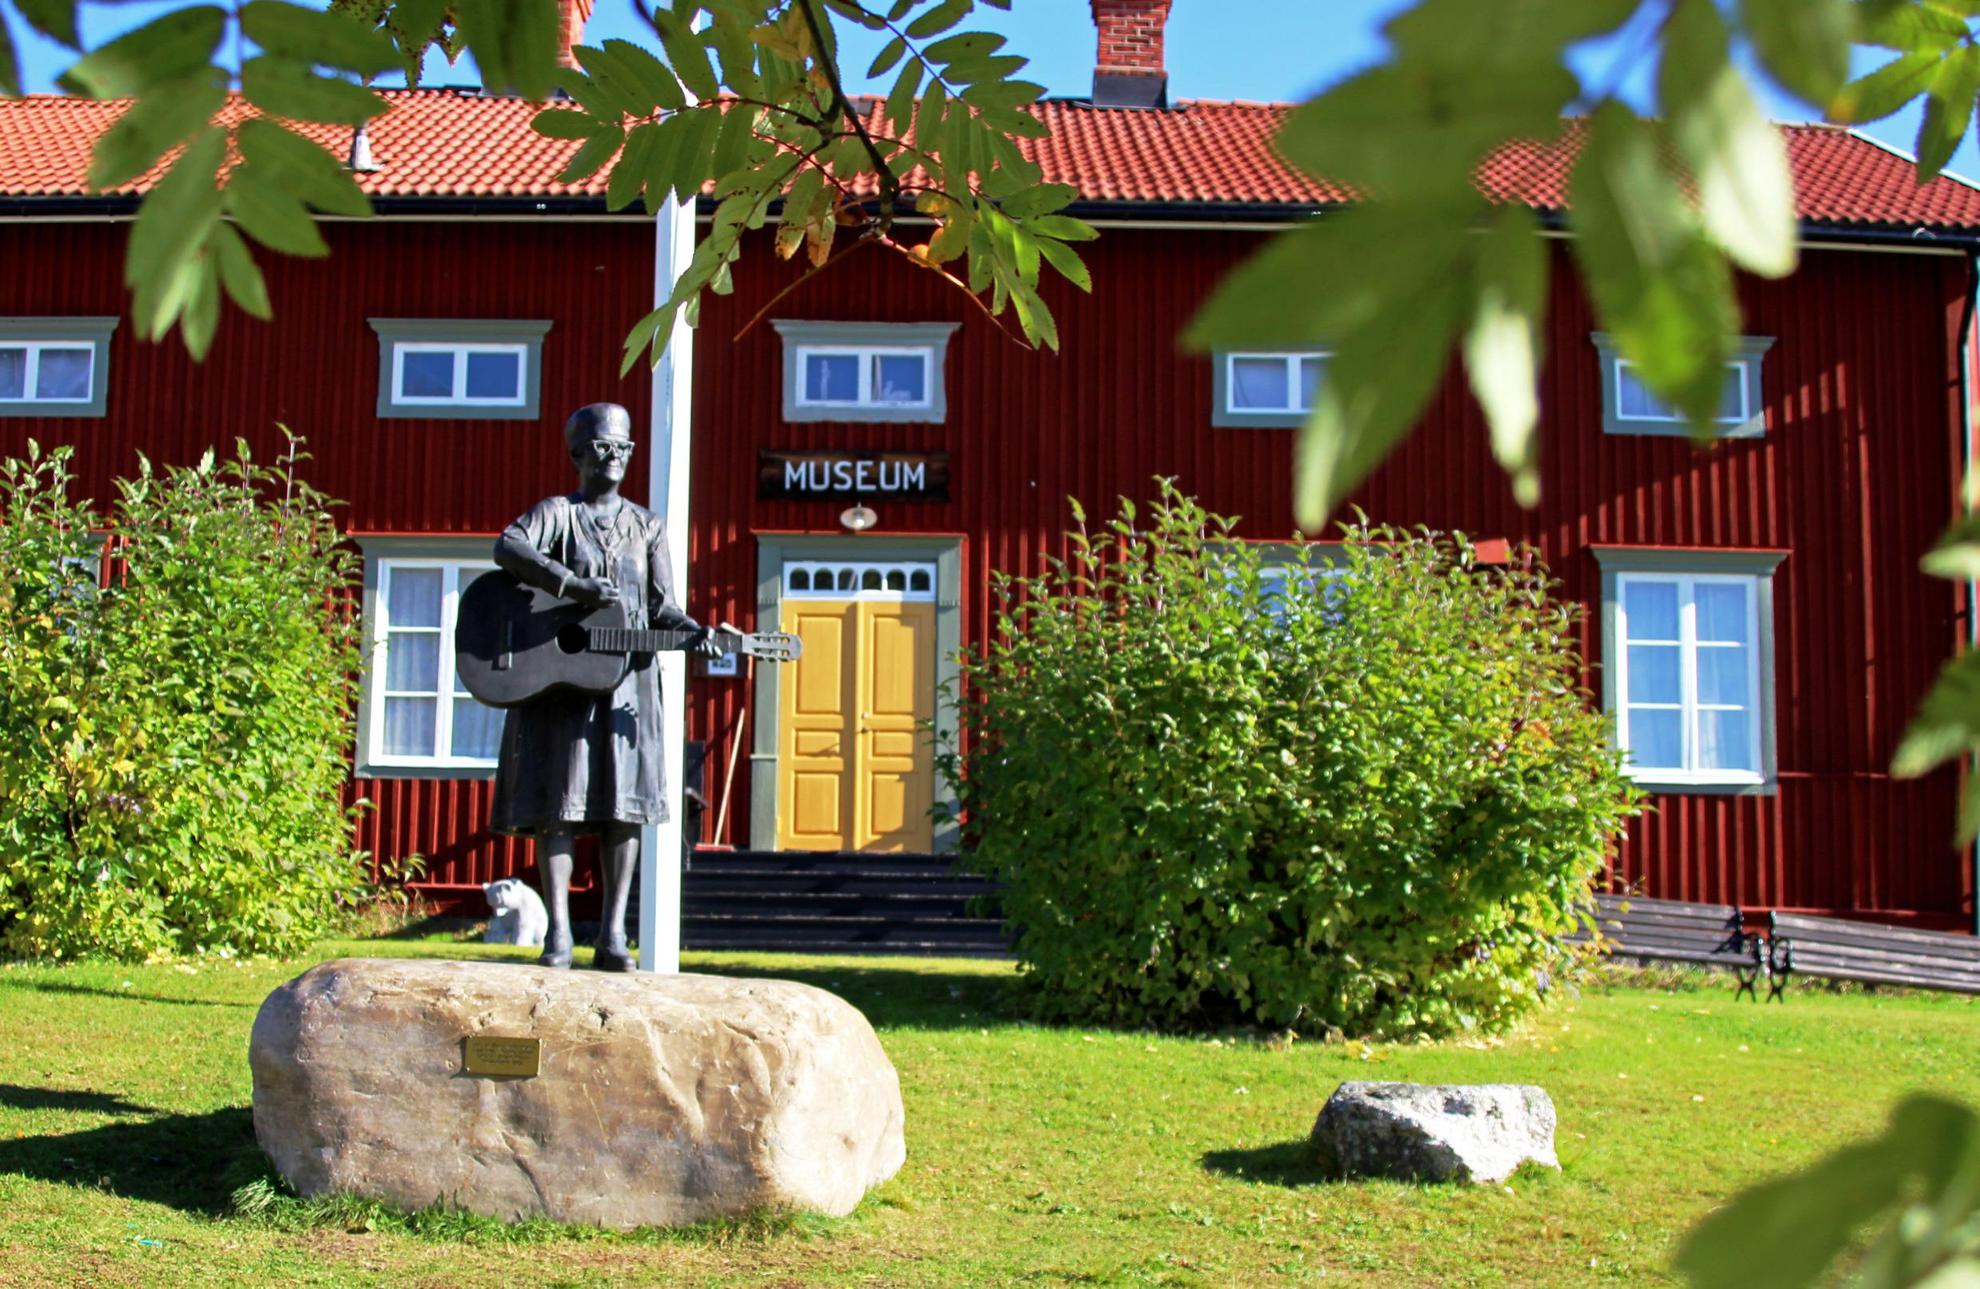 A large red wooden house with a yellow door, surrounded by green bushes. In the foreground is a flagpole and a statue of a woman with a guitar.